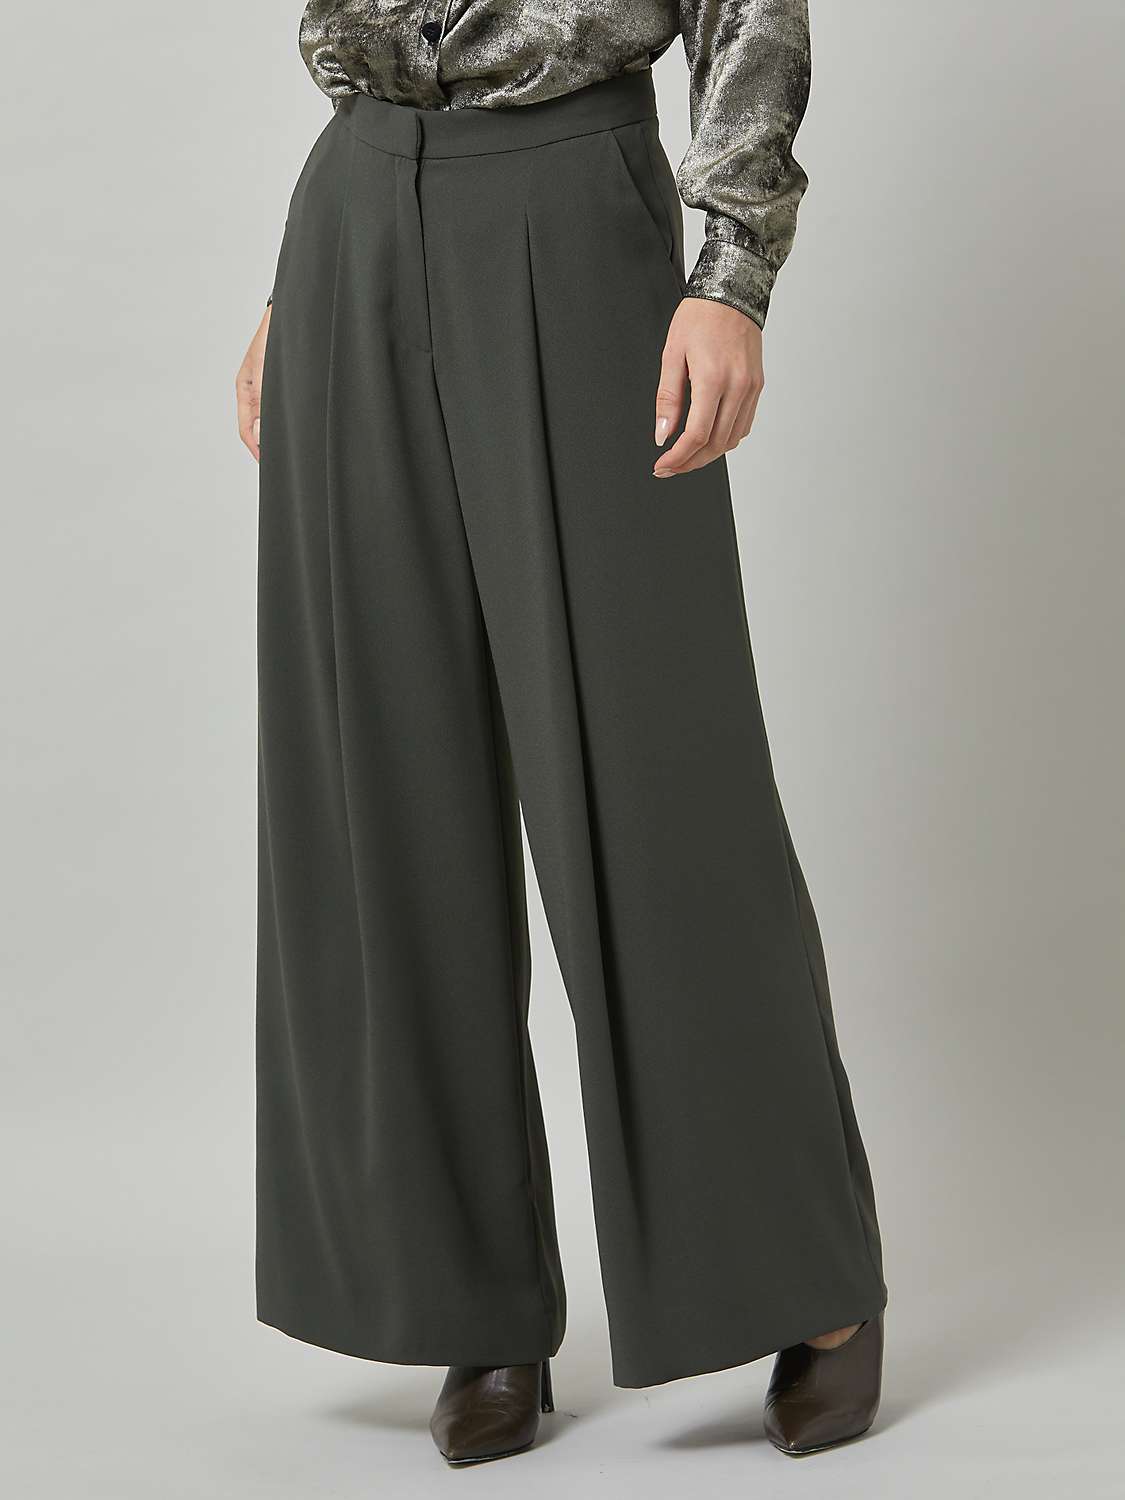 Buy Helen McAlinden Charlize Trousers Online at johnlewis.com